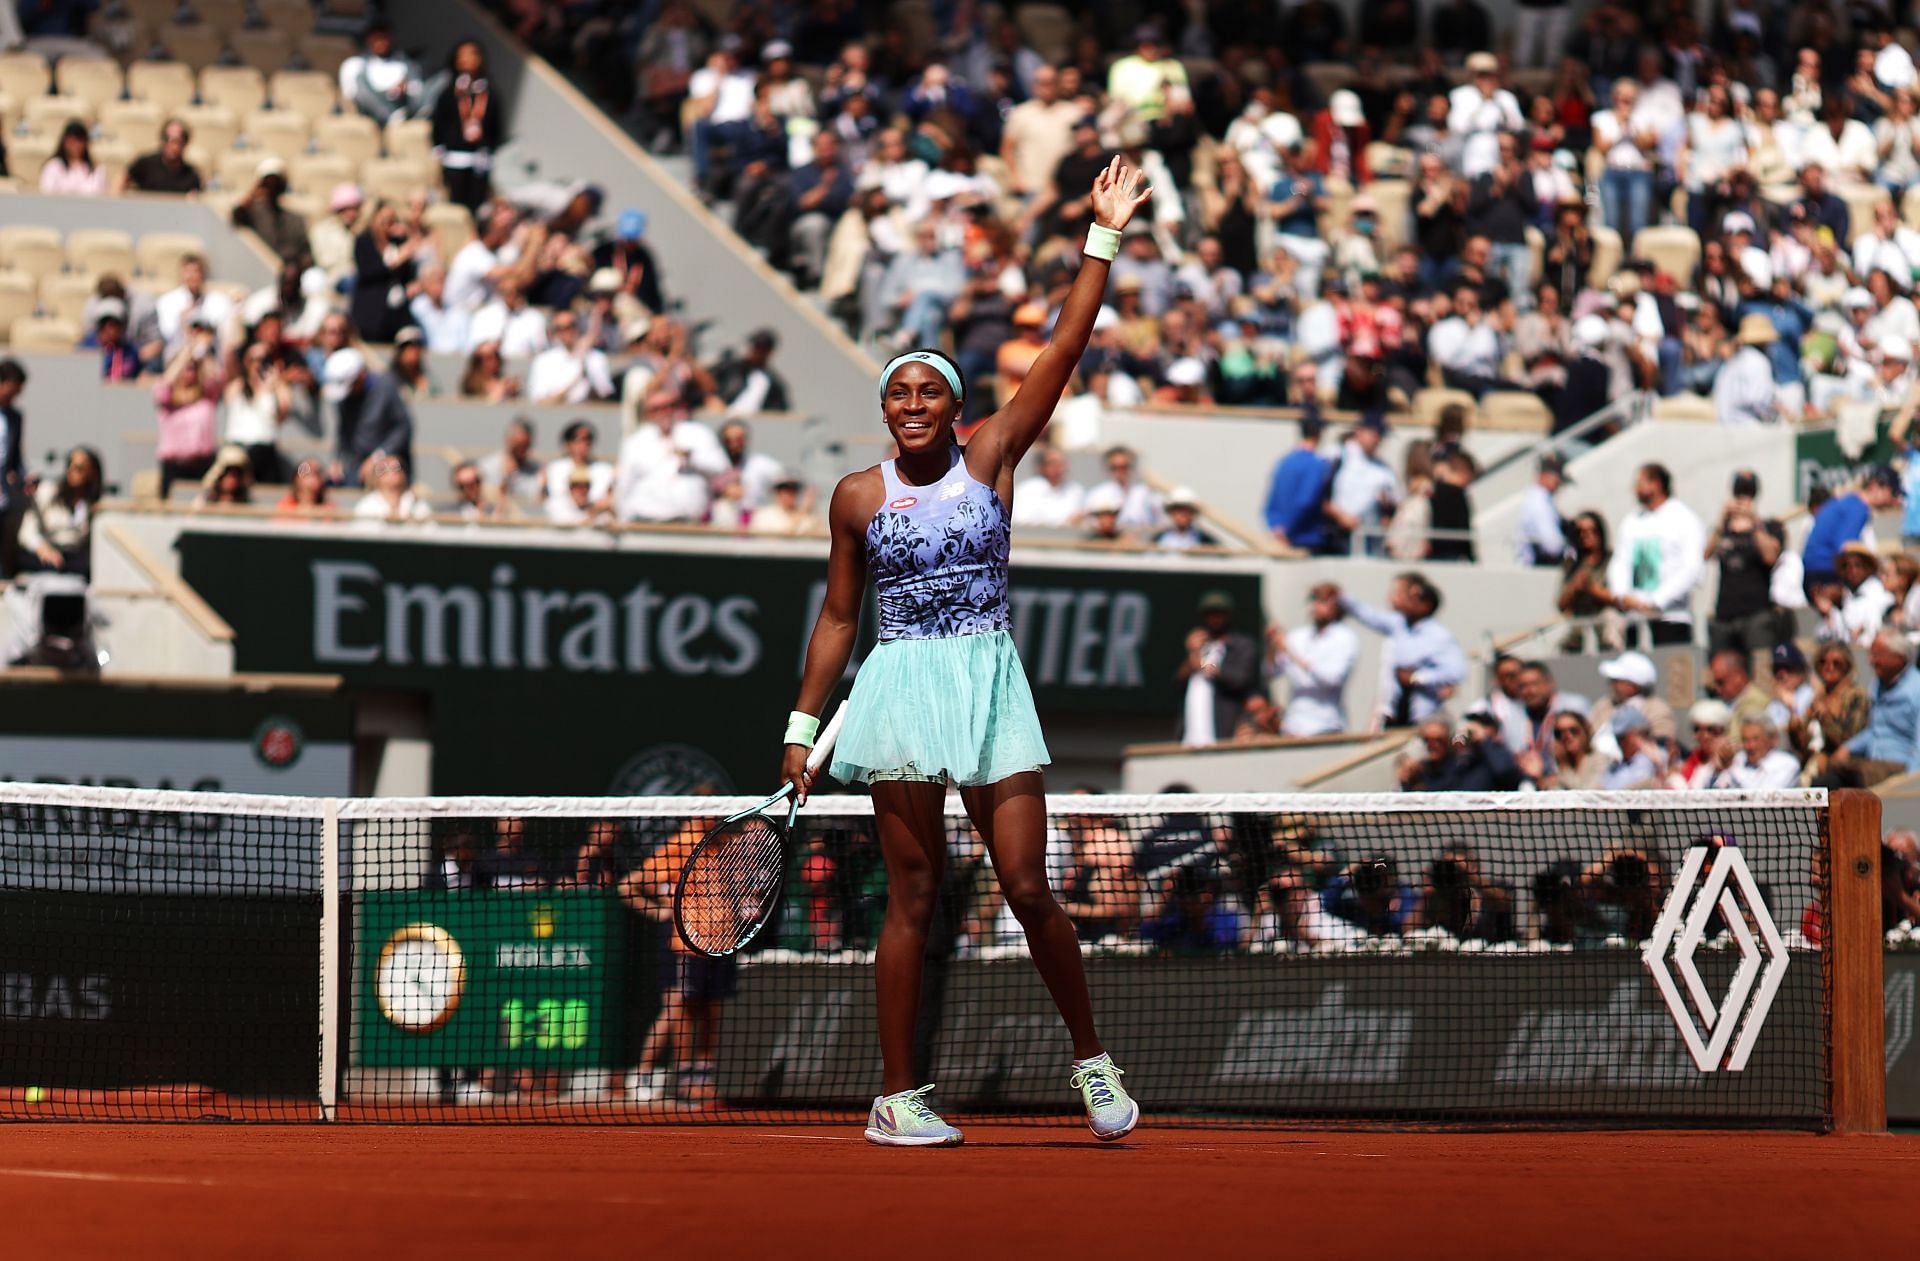 Gauff will take on Martina Trevisan in the semifinals of the French Open